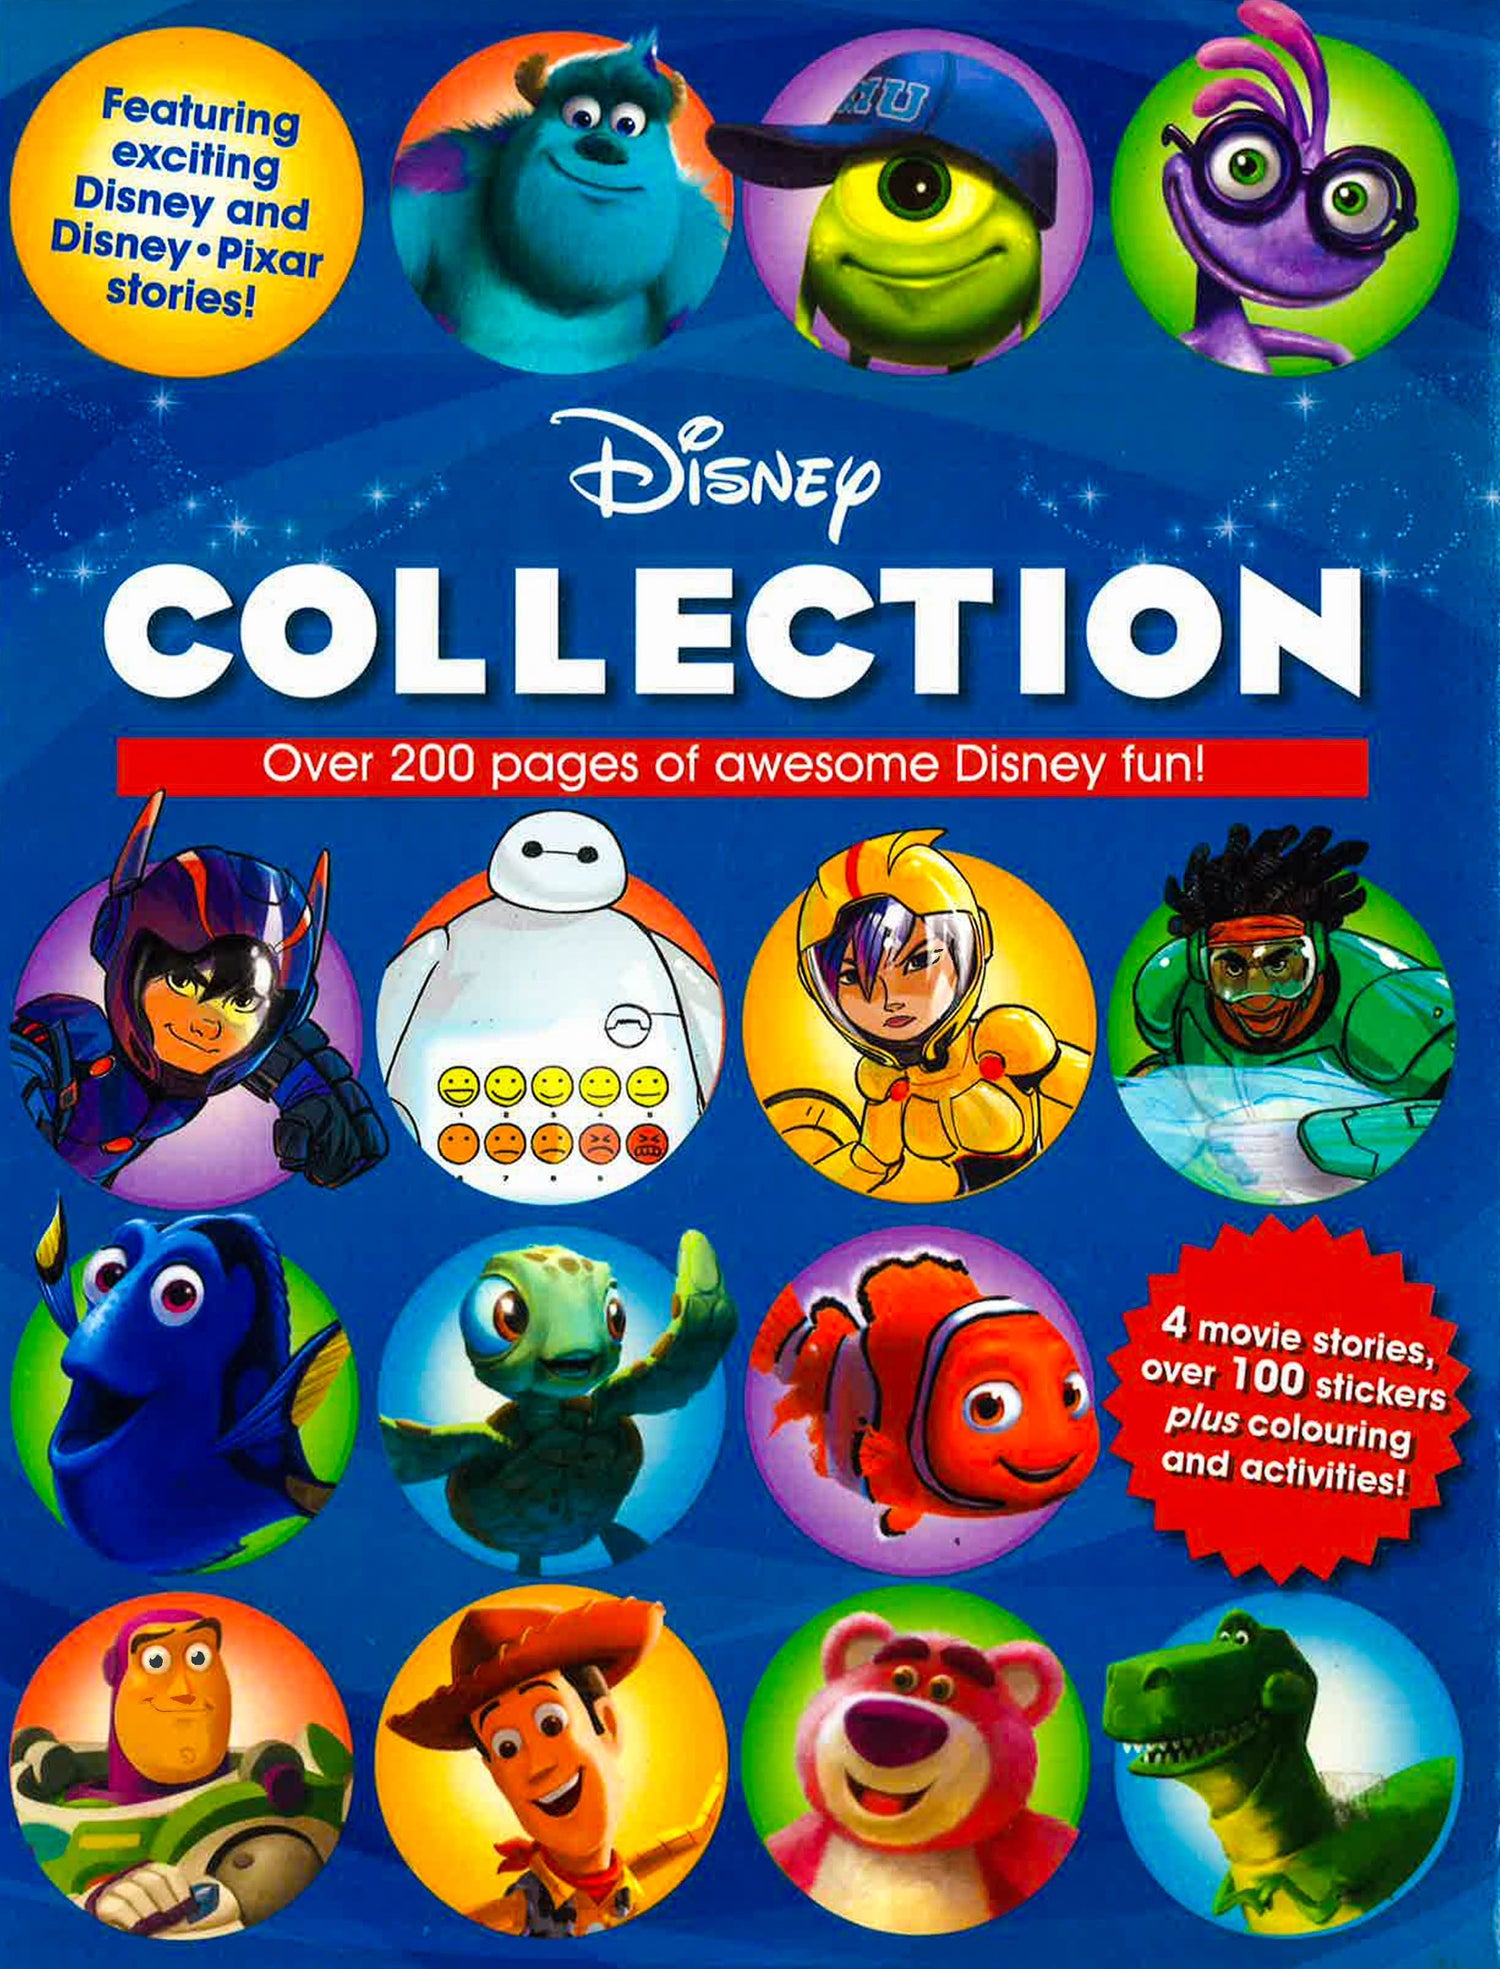 Colouring　Stories,　–　BookXcess　Disney　Collection:　100　Plus　Movie　A　Over　Stickers